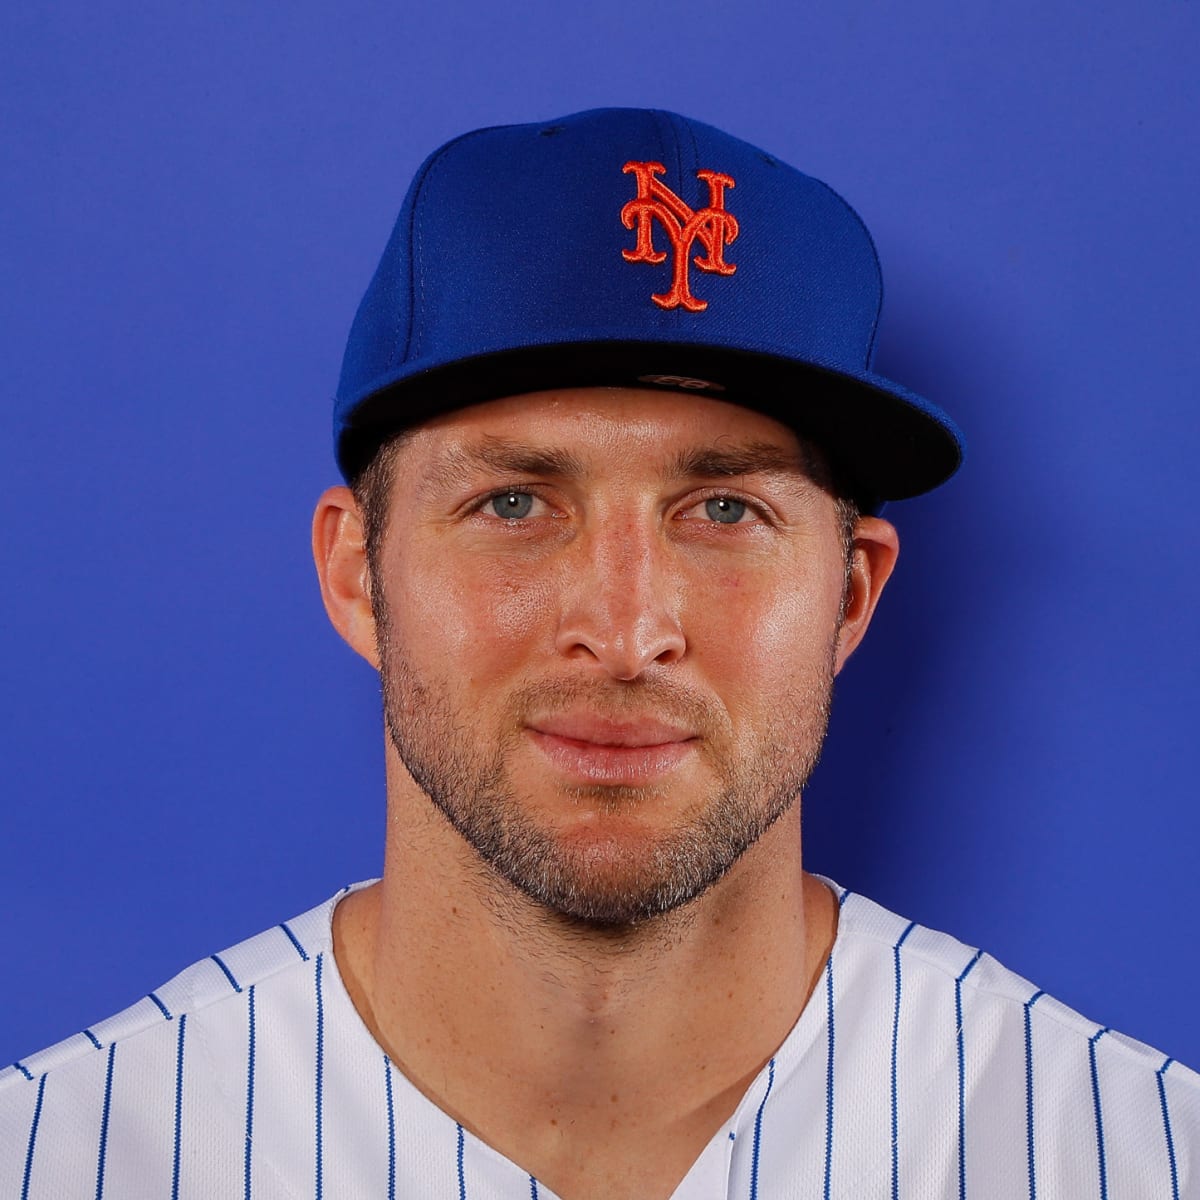 Mets: Tim Tebow hit a spring training home run off an MLB reliever